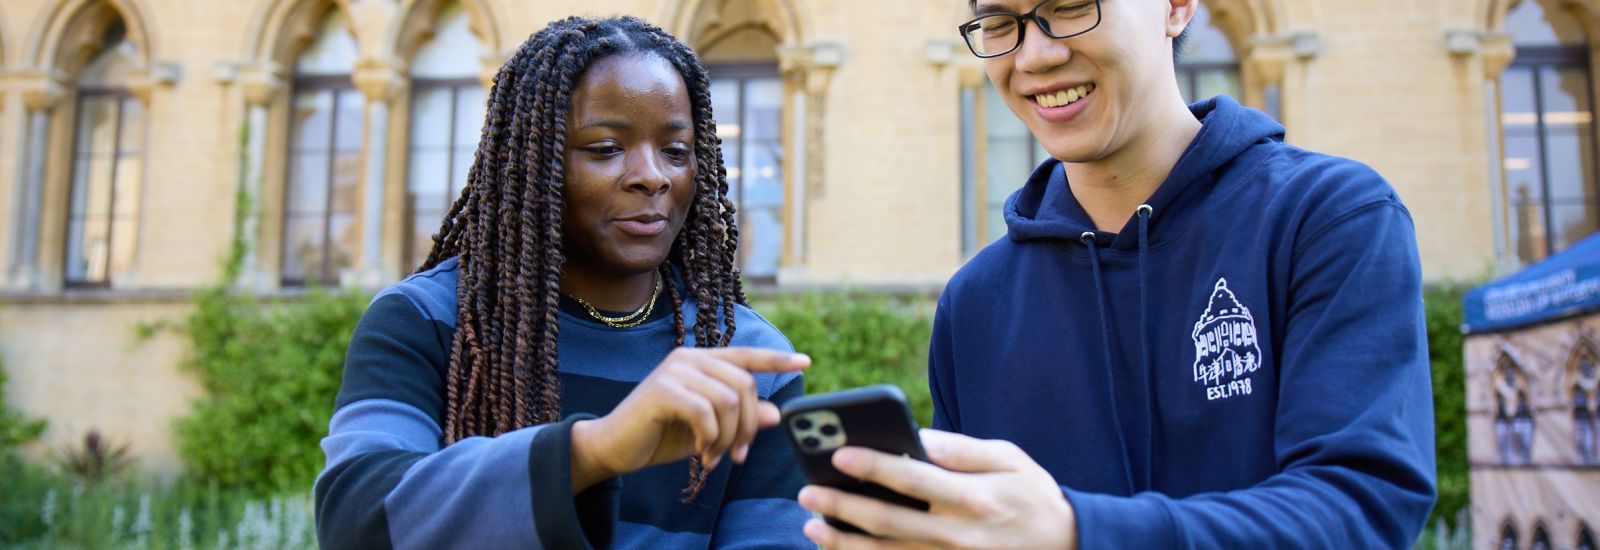 Two students looking at a phone